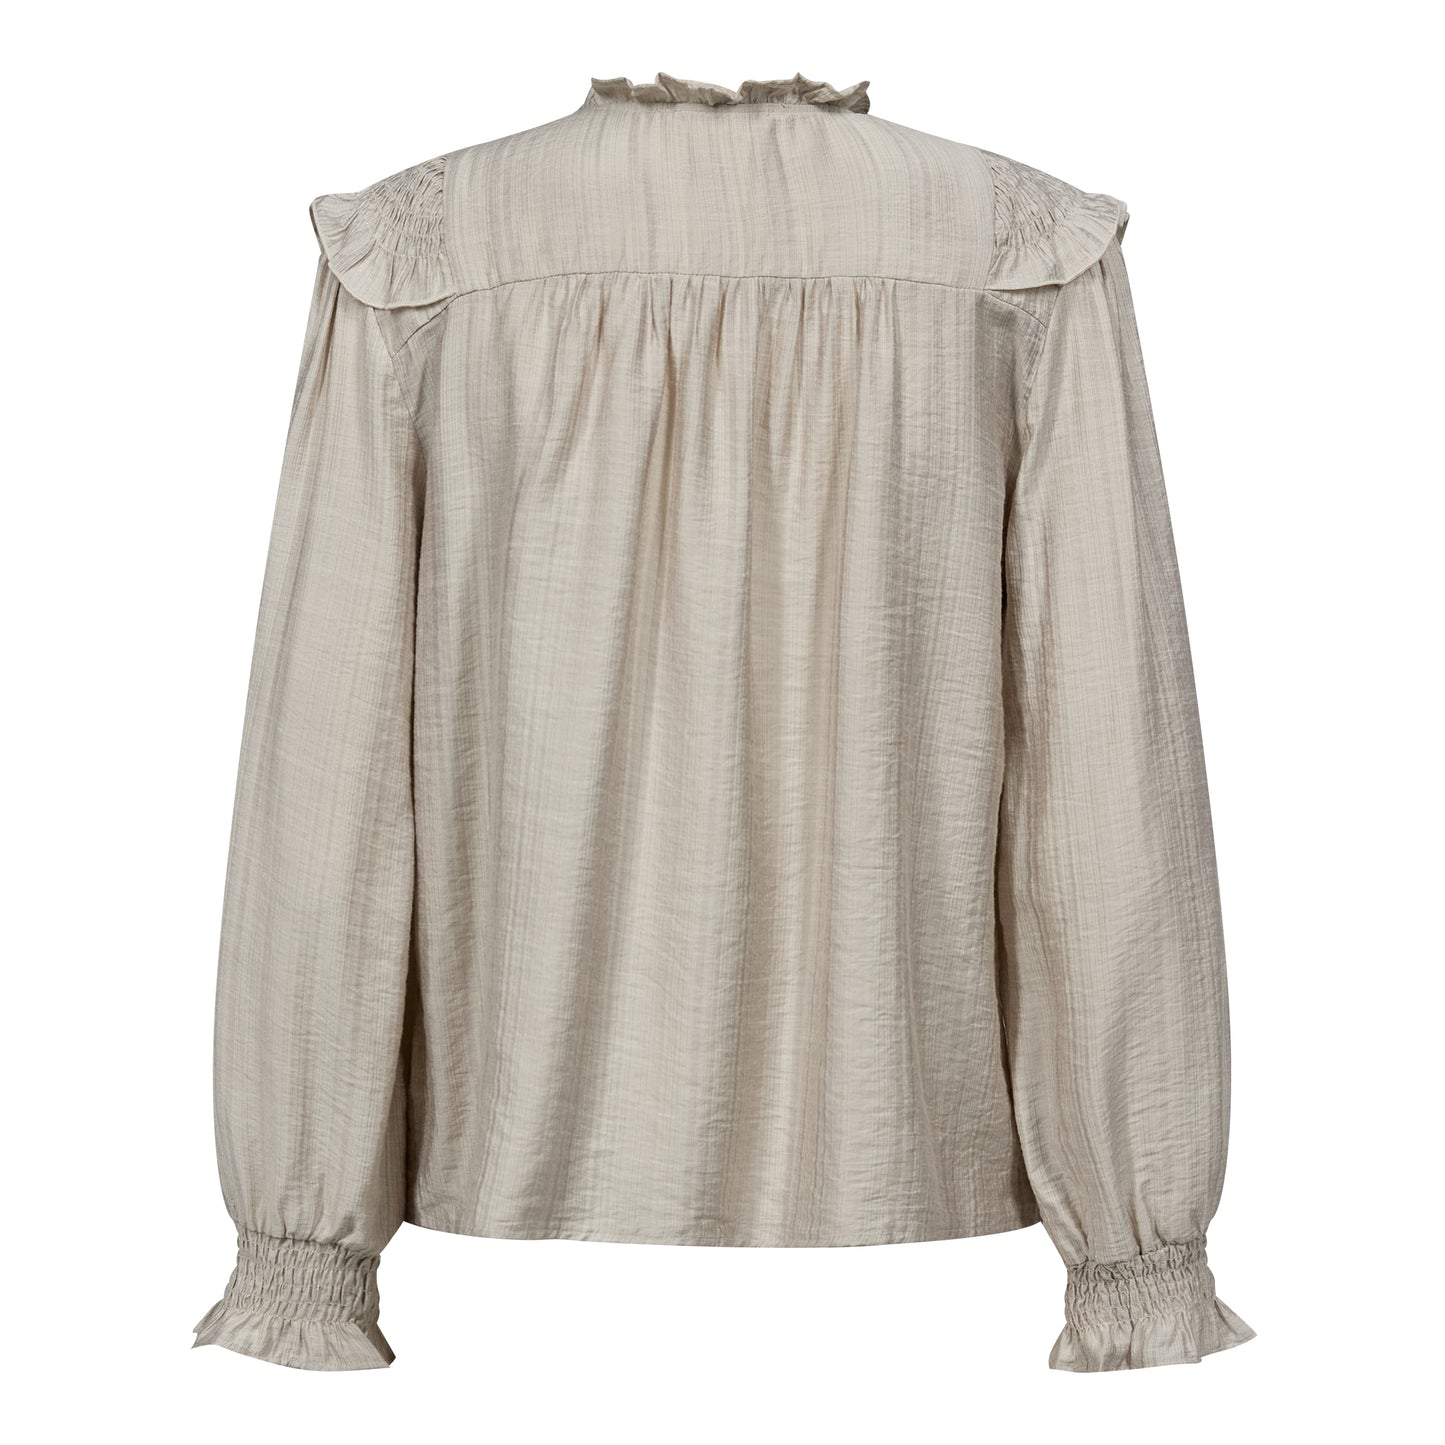 Cocouture - AngusCC Smock Frill Shirt - Bone